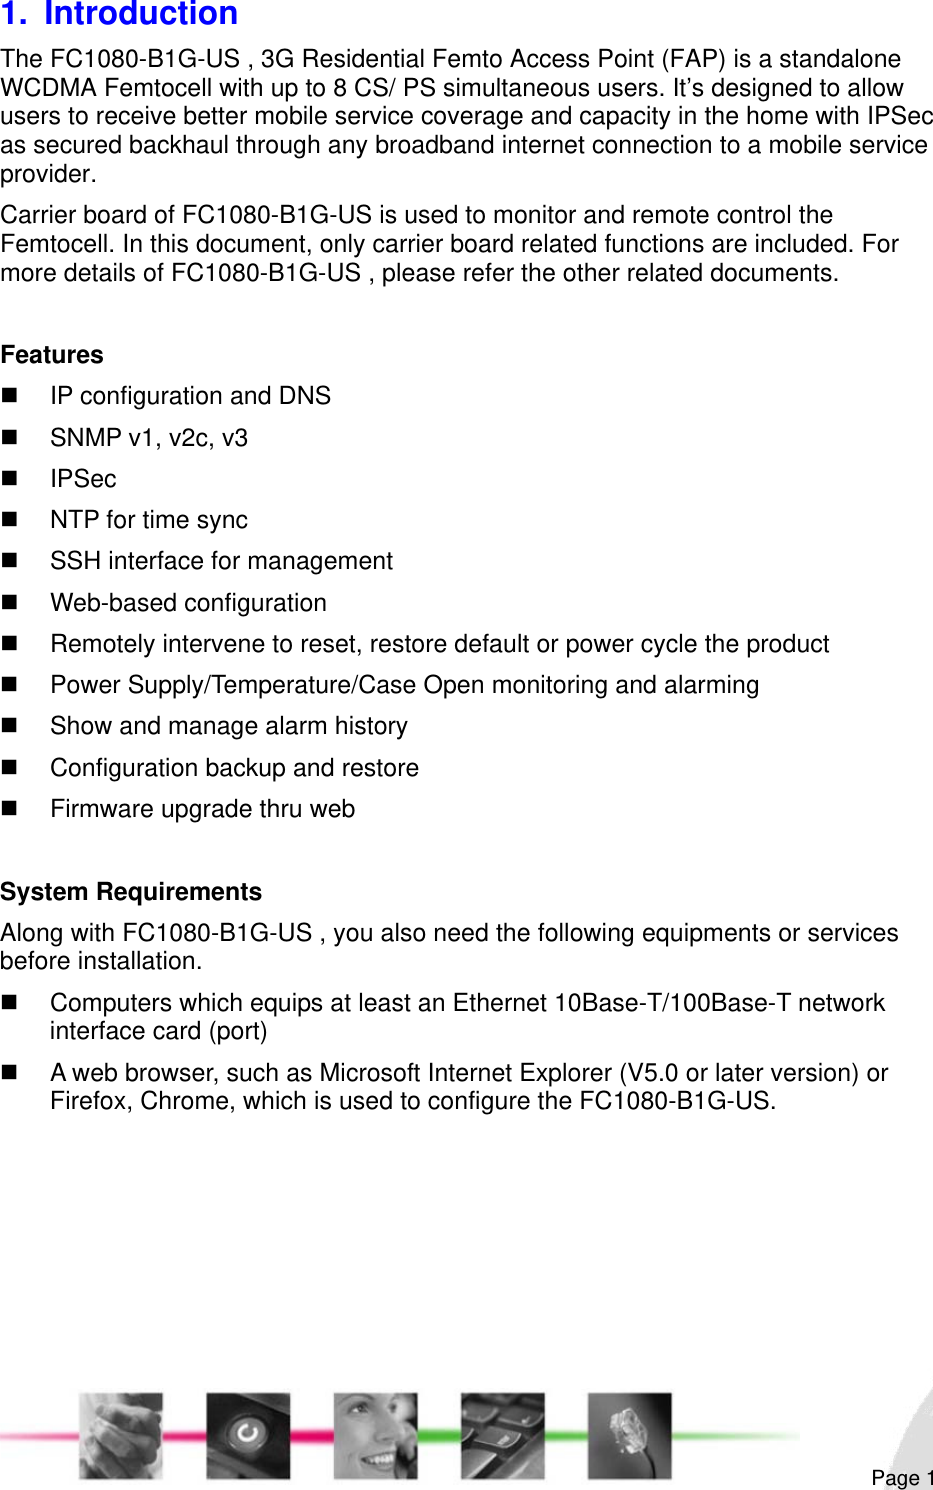                                                                                                                                                                                                        Page 1 1. Introduction The FC1080-B1G-US , 3G Residential Femto Access Point (FAP) is a standalone WCDMA Femtocell with up to 8 CS/ PS simultaneous users. It’s designed to allow users to receive better mobile service coverage and capacity in the home with IPSec as secured backhaul through any broadband internet connection to a mobile service provider. Carrier board of FC1080-B1G-US is used to monitor and remote control the Femtocell. In this document, only carrier board related functions are included. For more details of FC1080-B1G-US , please refer the other related documents.  Features   IP configuration and DNS   SNMP v1, v2c, v3  IPSec   NTP for time sync   SSH interface for management   Web-based configuration    Remotely intervene to reset, restore default or power cycle the product   Power Supply/Temperature/Case Open monitoring and alarming   Show and manage alarm history   Configuration backup and restore   Firmware upgrade thru web  System Requirements Along with FC1080-B1G-US , you also need the following equipments or services before installation.   Computers which equips at least an Ethernet 10Base-T/100Base-T network interface card (port)   A web browser, such as Microsoft Internet Explorer (V5.0 or later version) or Firefox, Chrome, which is used to configure the FC1080-B1G-US.  